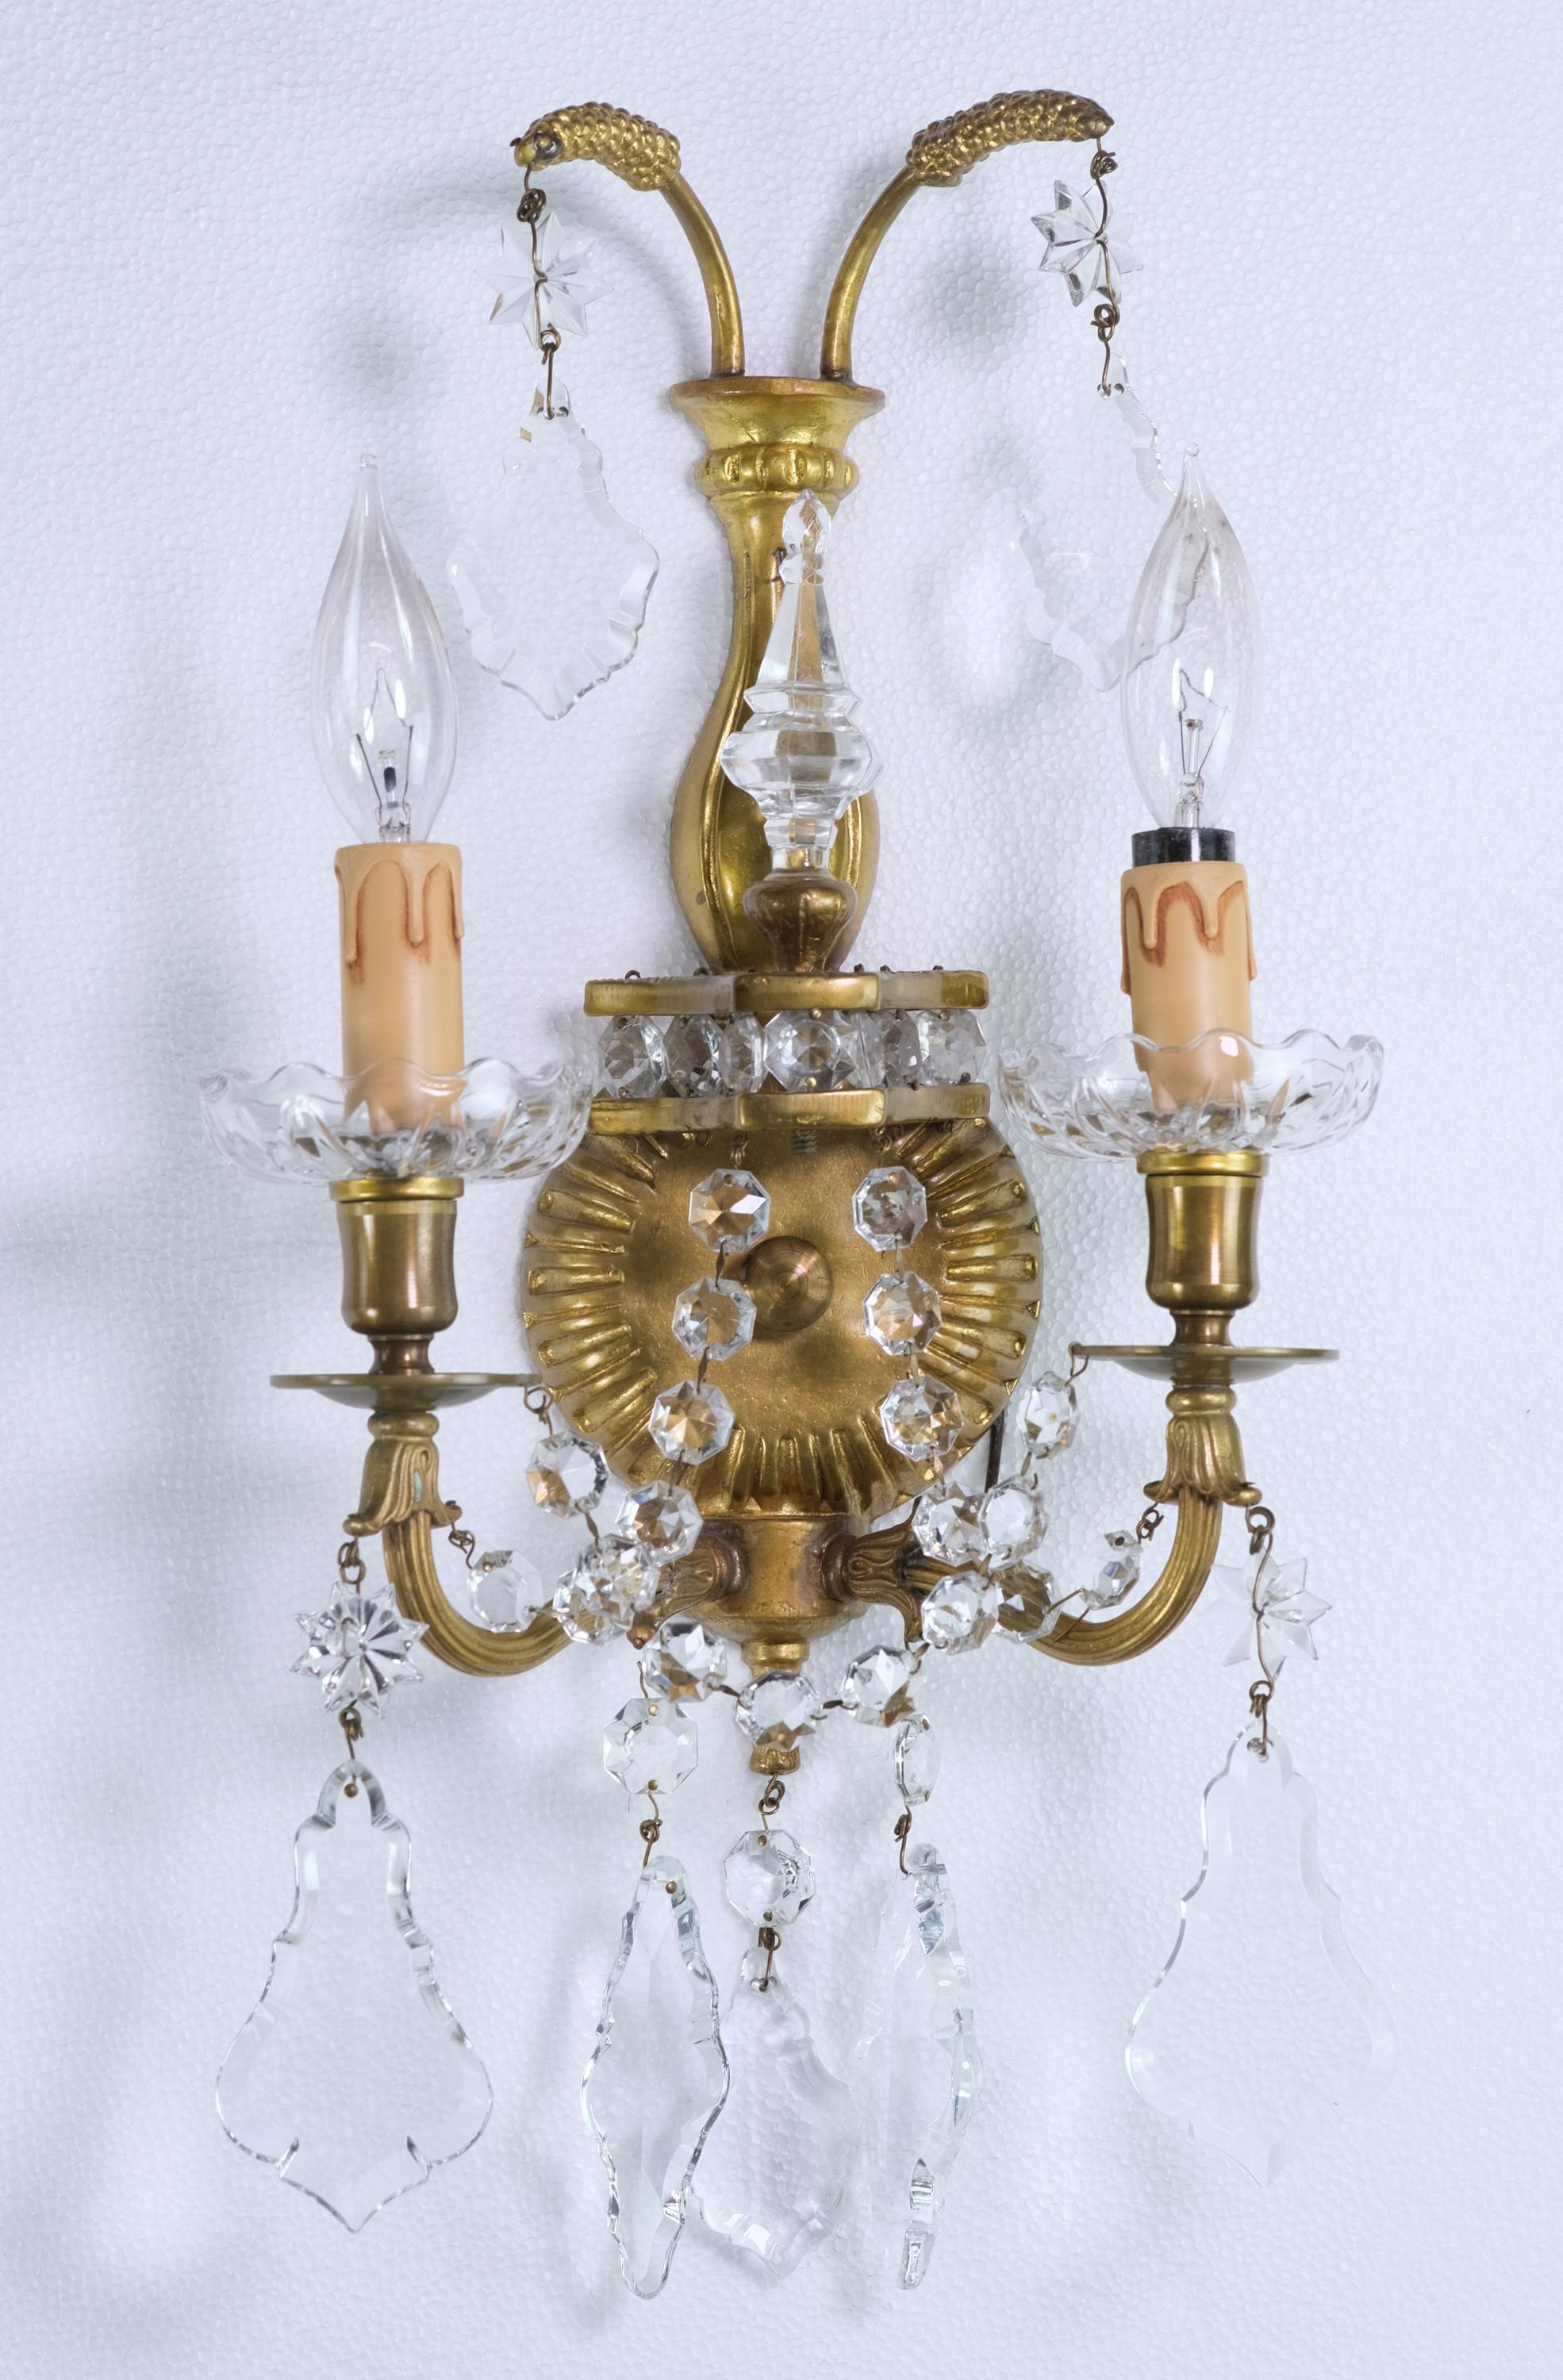 20th Century pair of brass and crystal sconces retrieved from the Herbert Hoover Suite in the NYC Waldorf Astoria Hotel on Park Ave. Cleaned and restored. Small quantity available at time of posting. Priced each. Please inquire. Please note, this